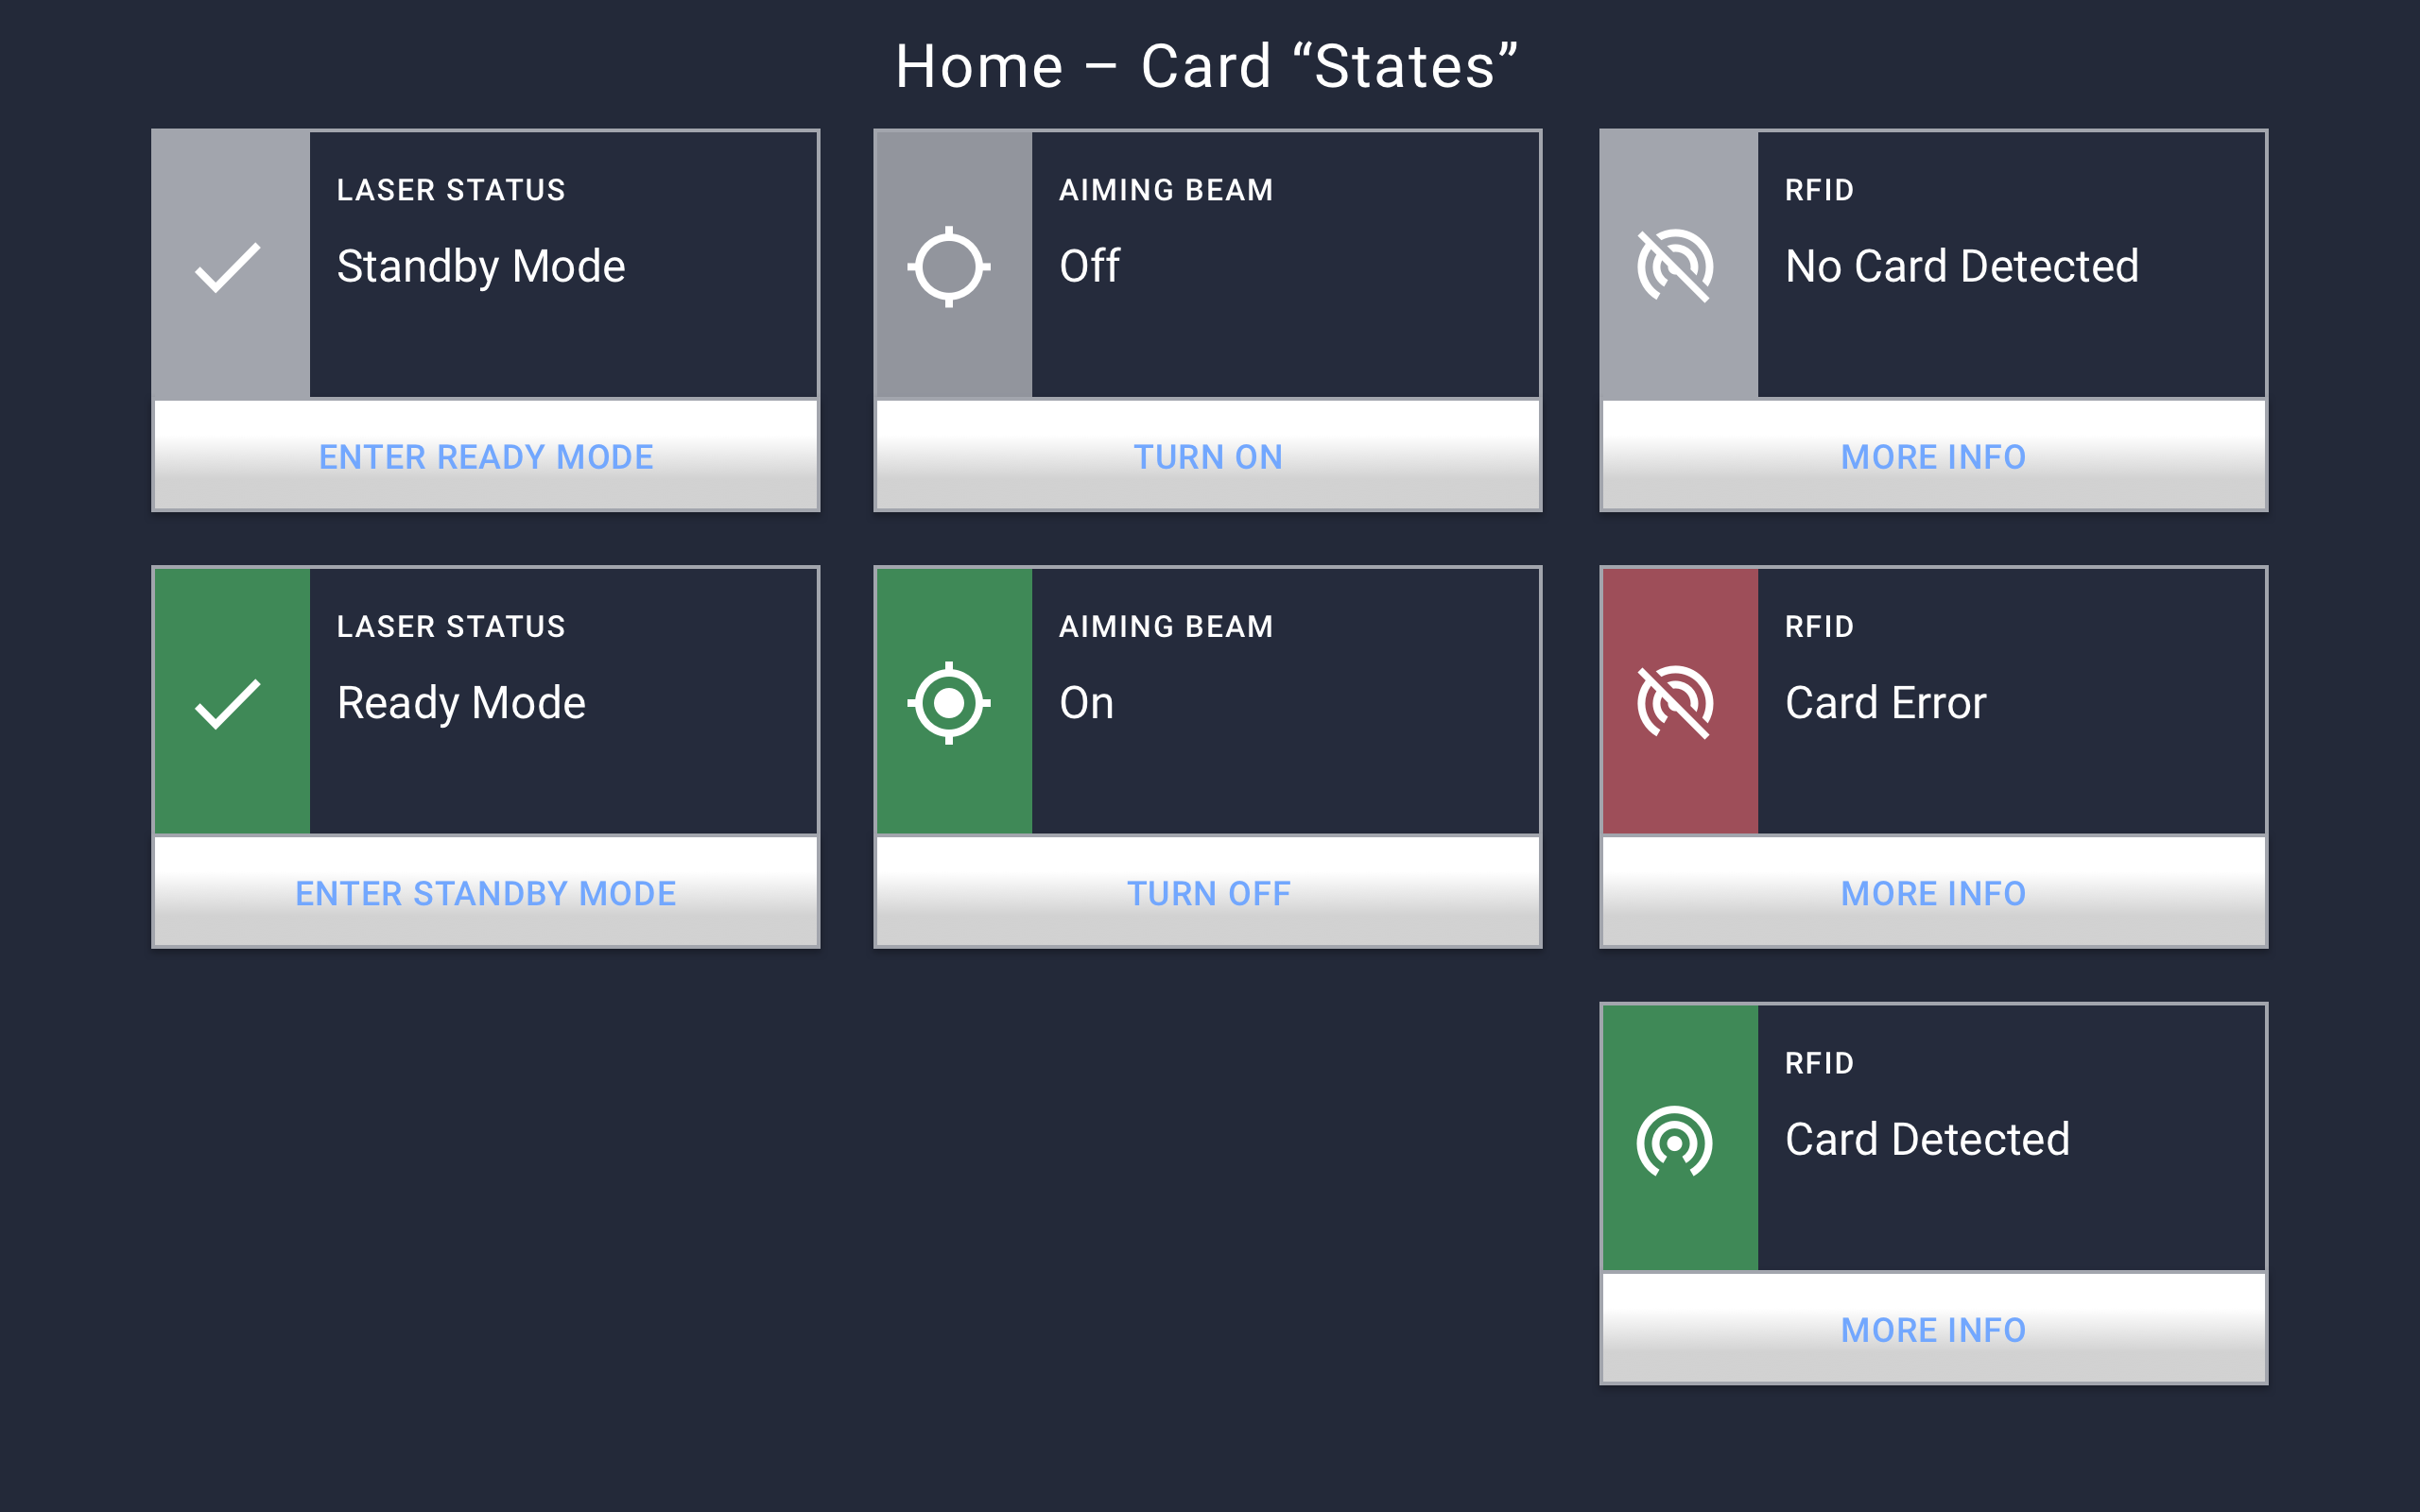 Home card states